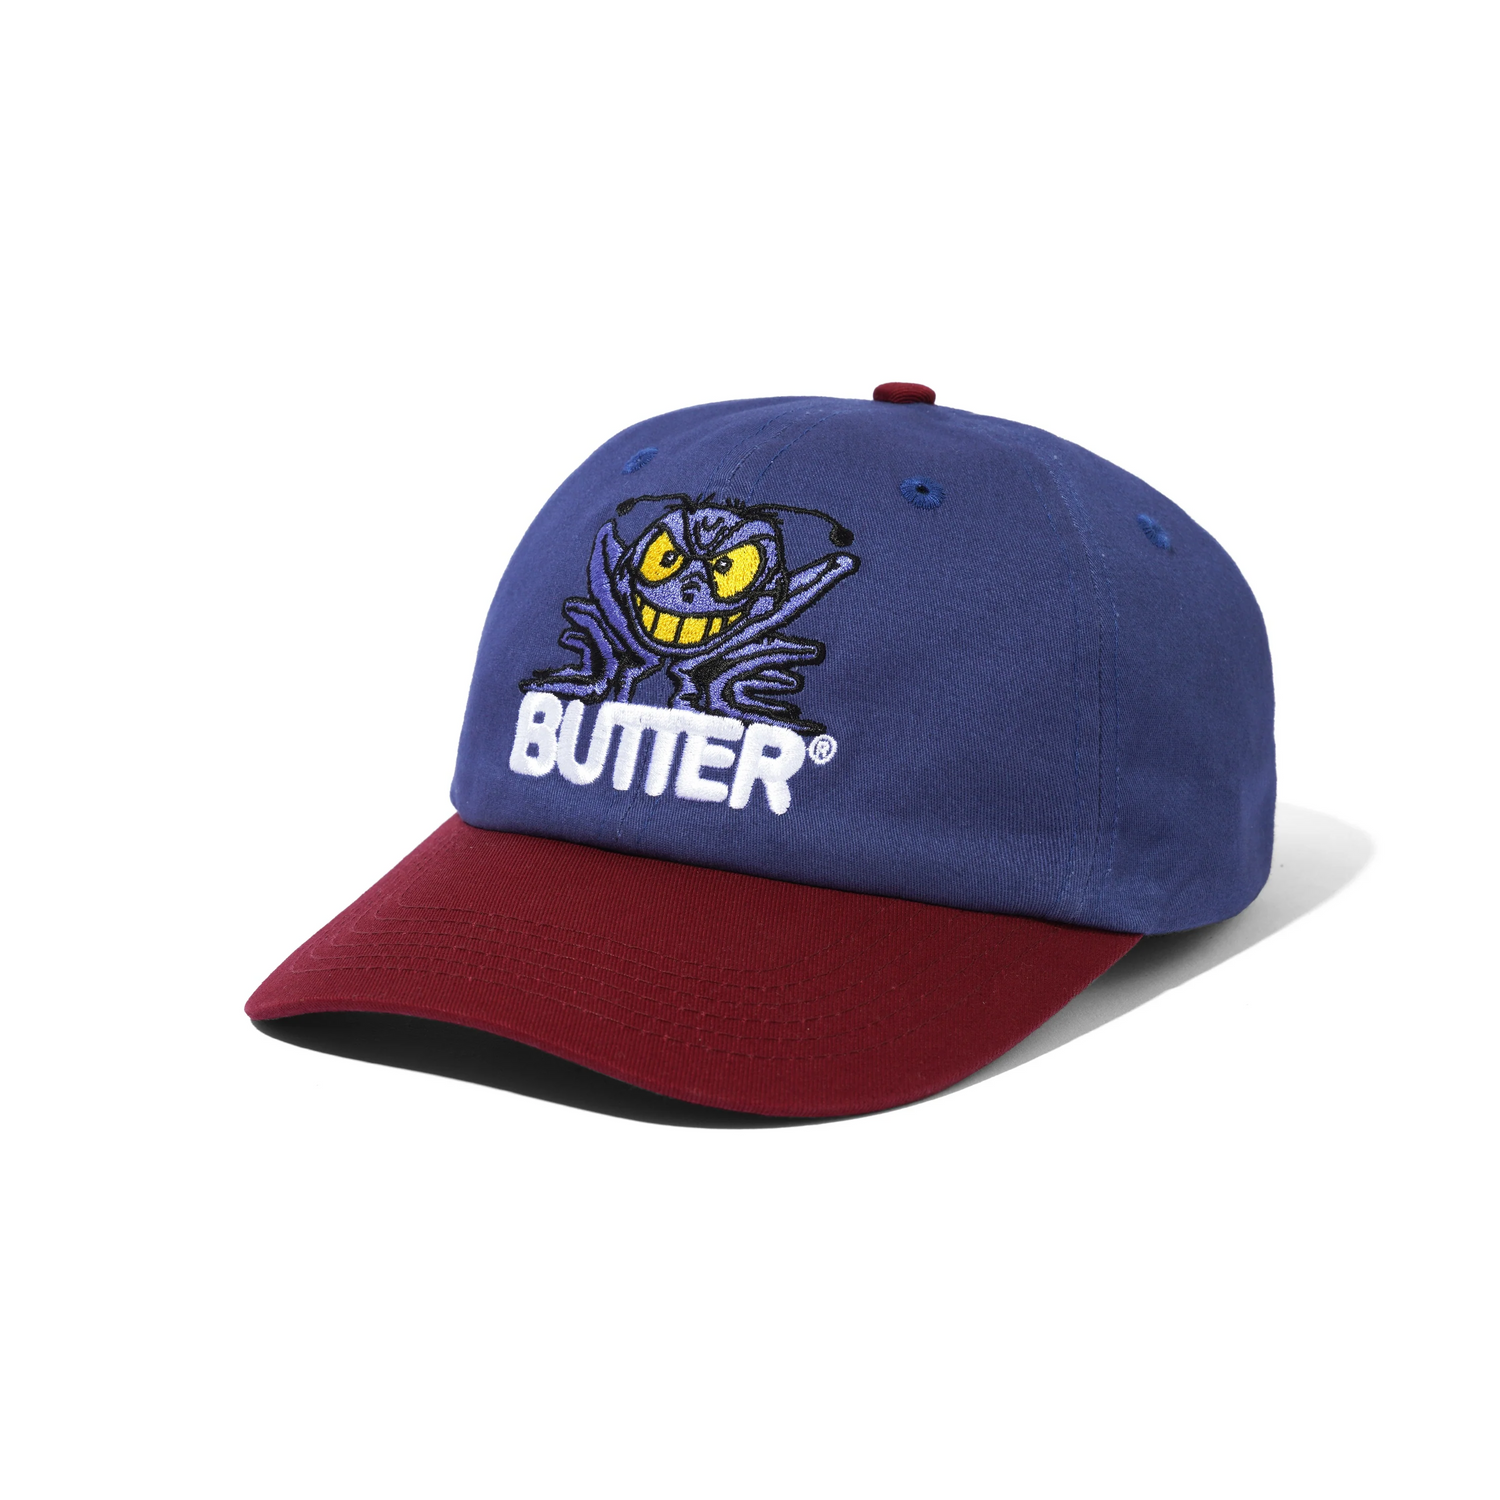 Insect 6 Panel Cap, Navy / Maroon